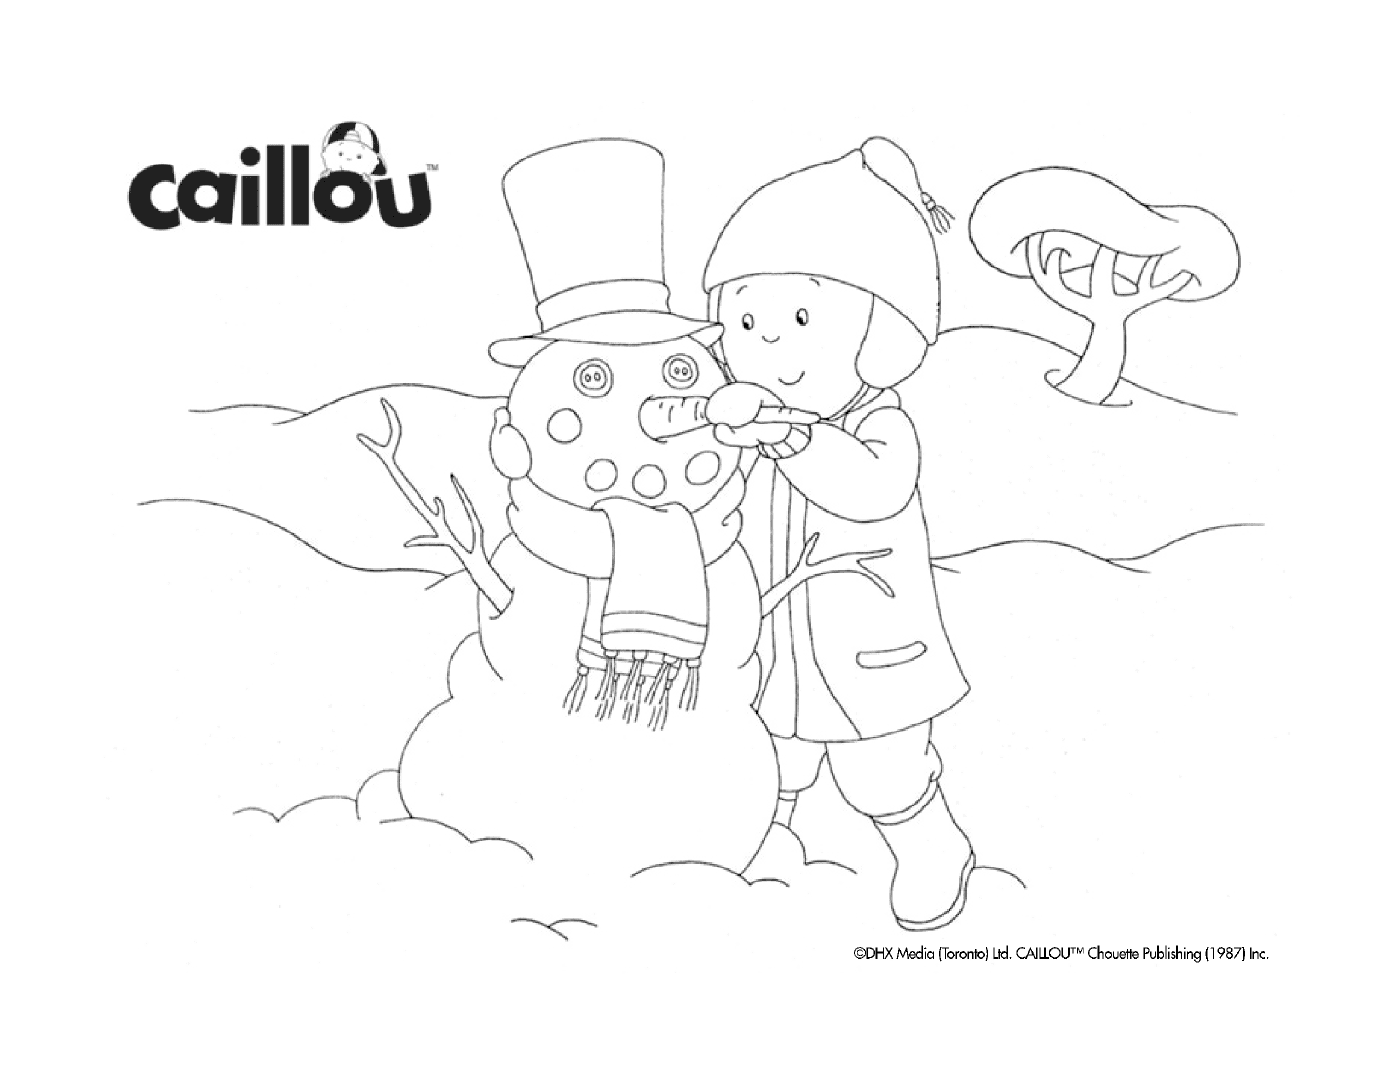  Construction of a snowman by Caillou 